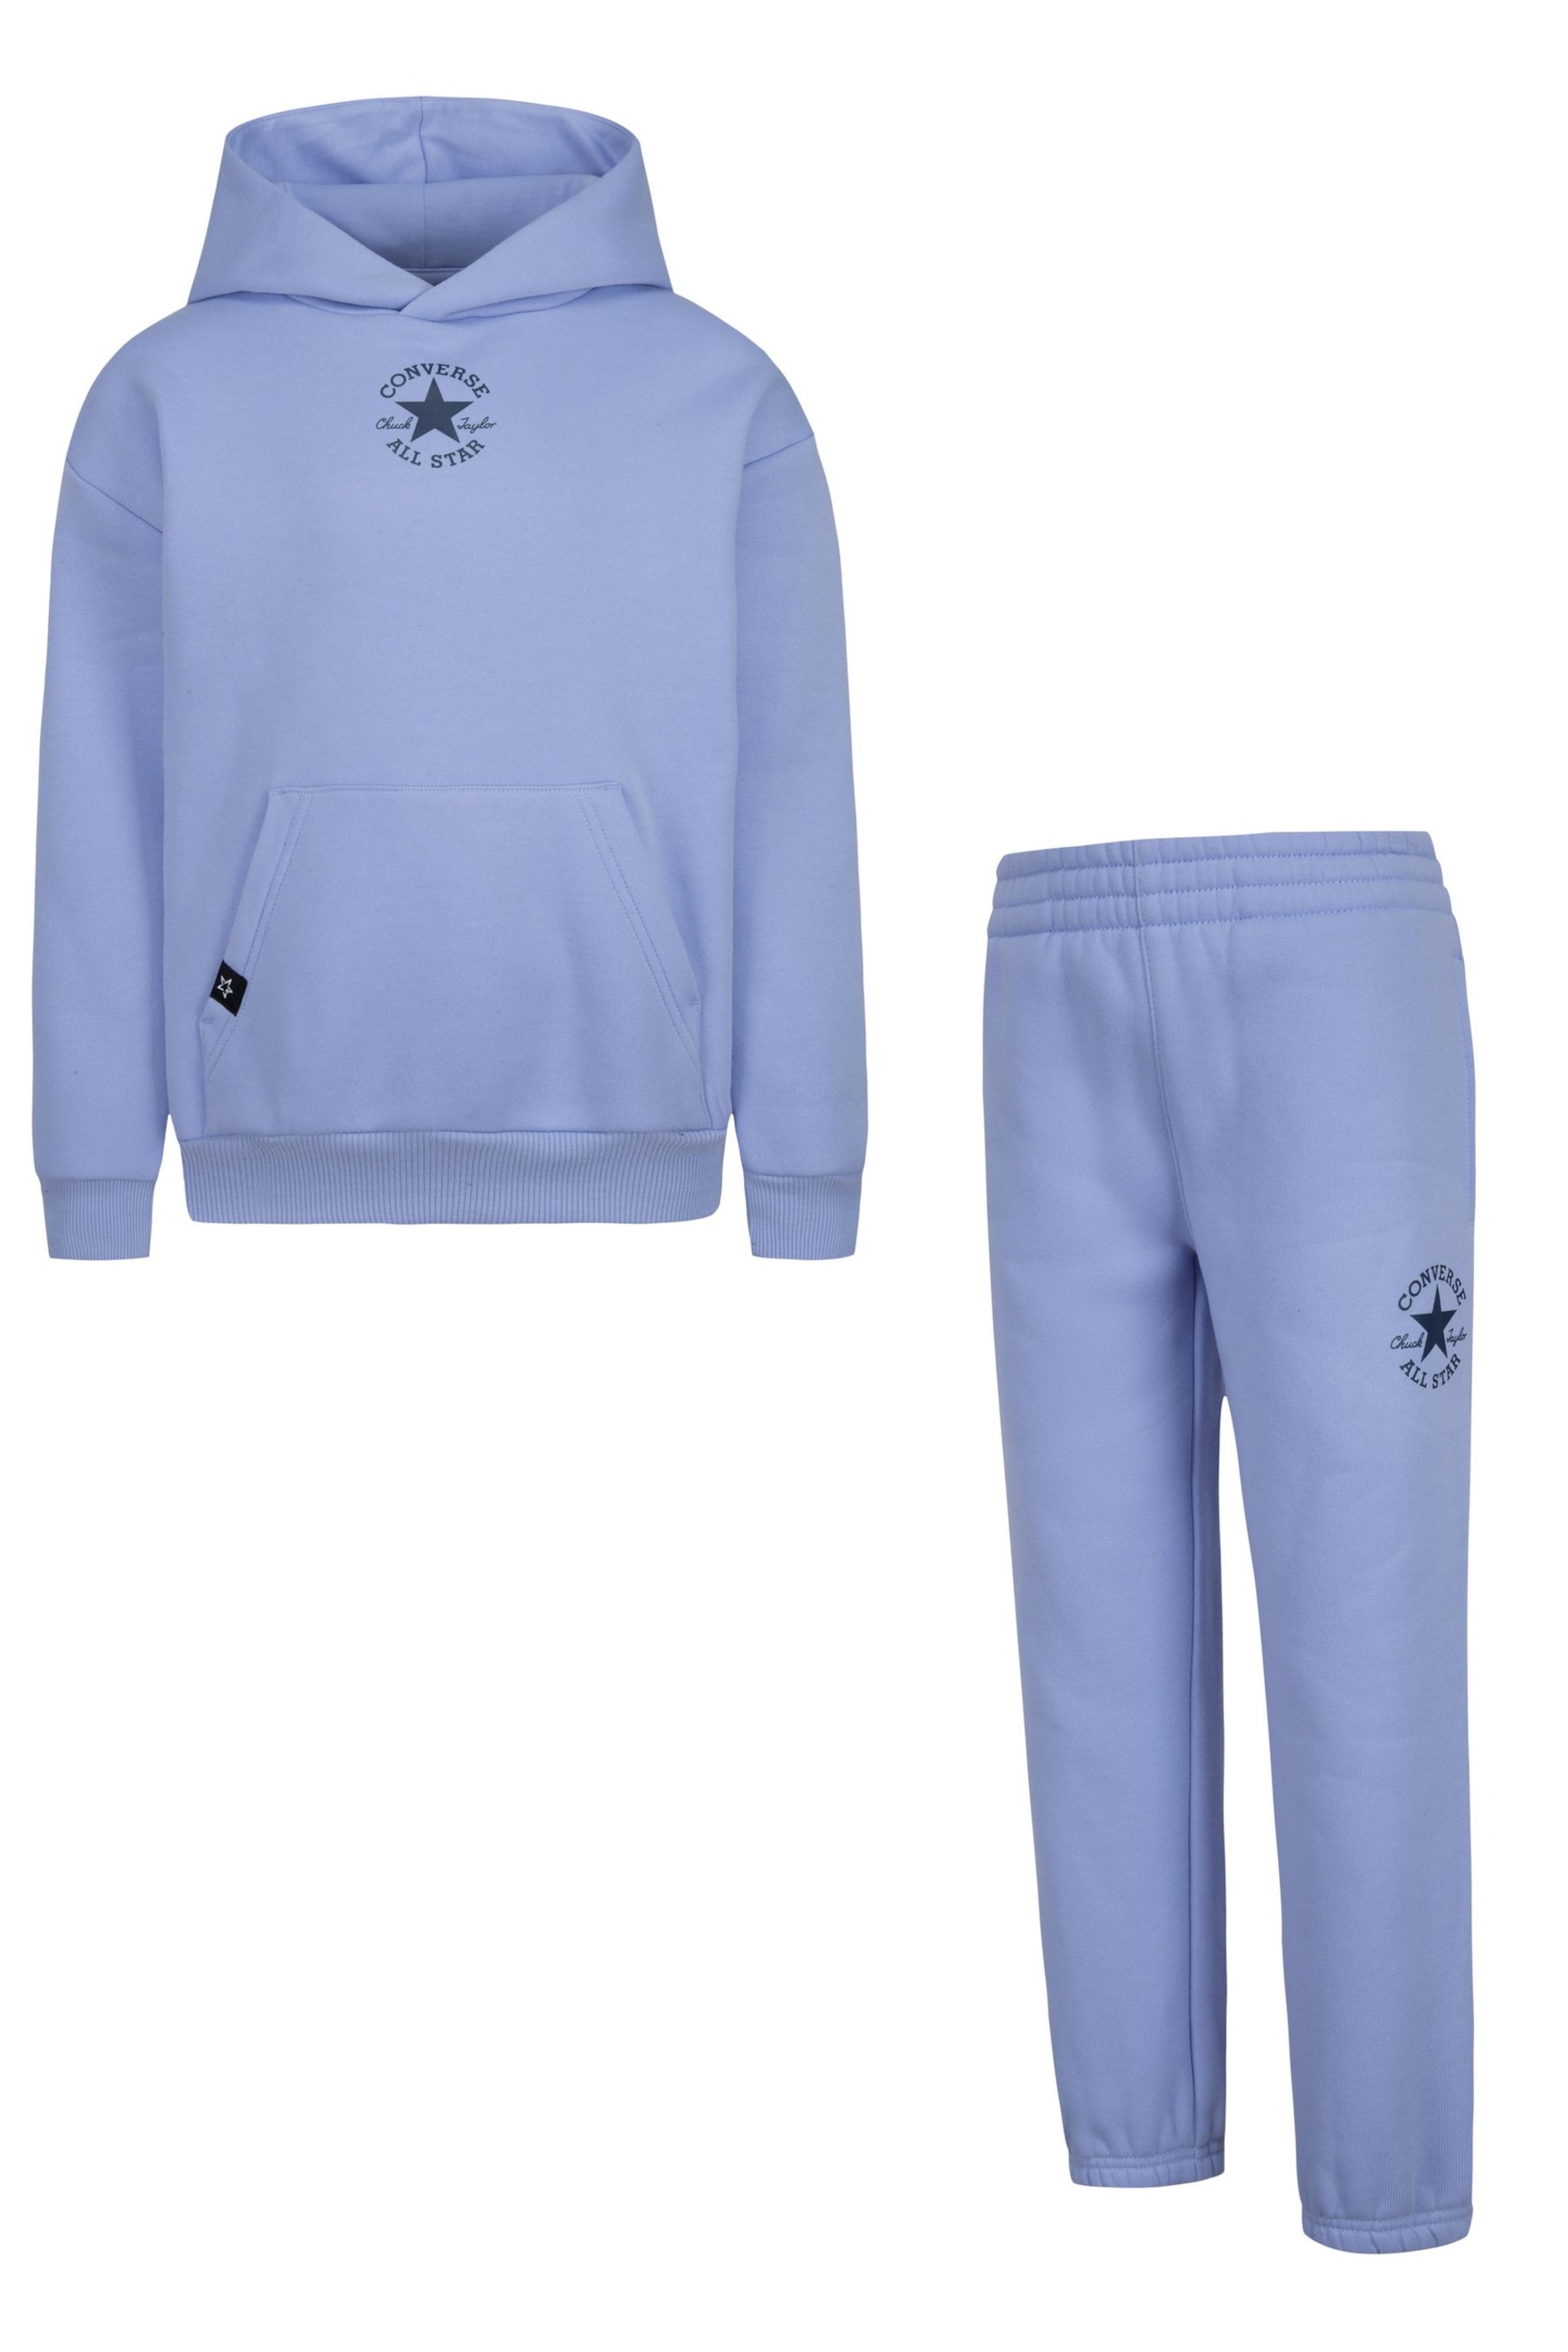 Converse Blue Little Kids Hoodie and Jogger Set - Image 1 of 9